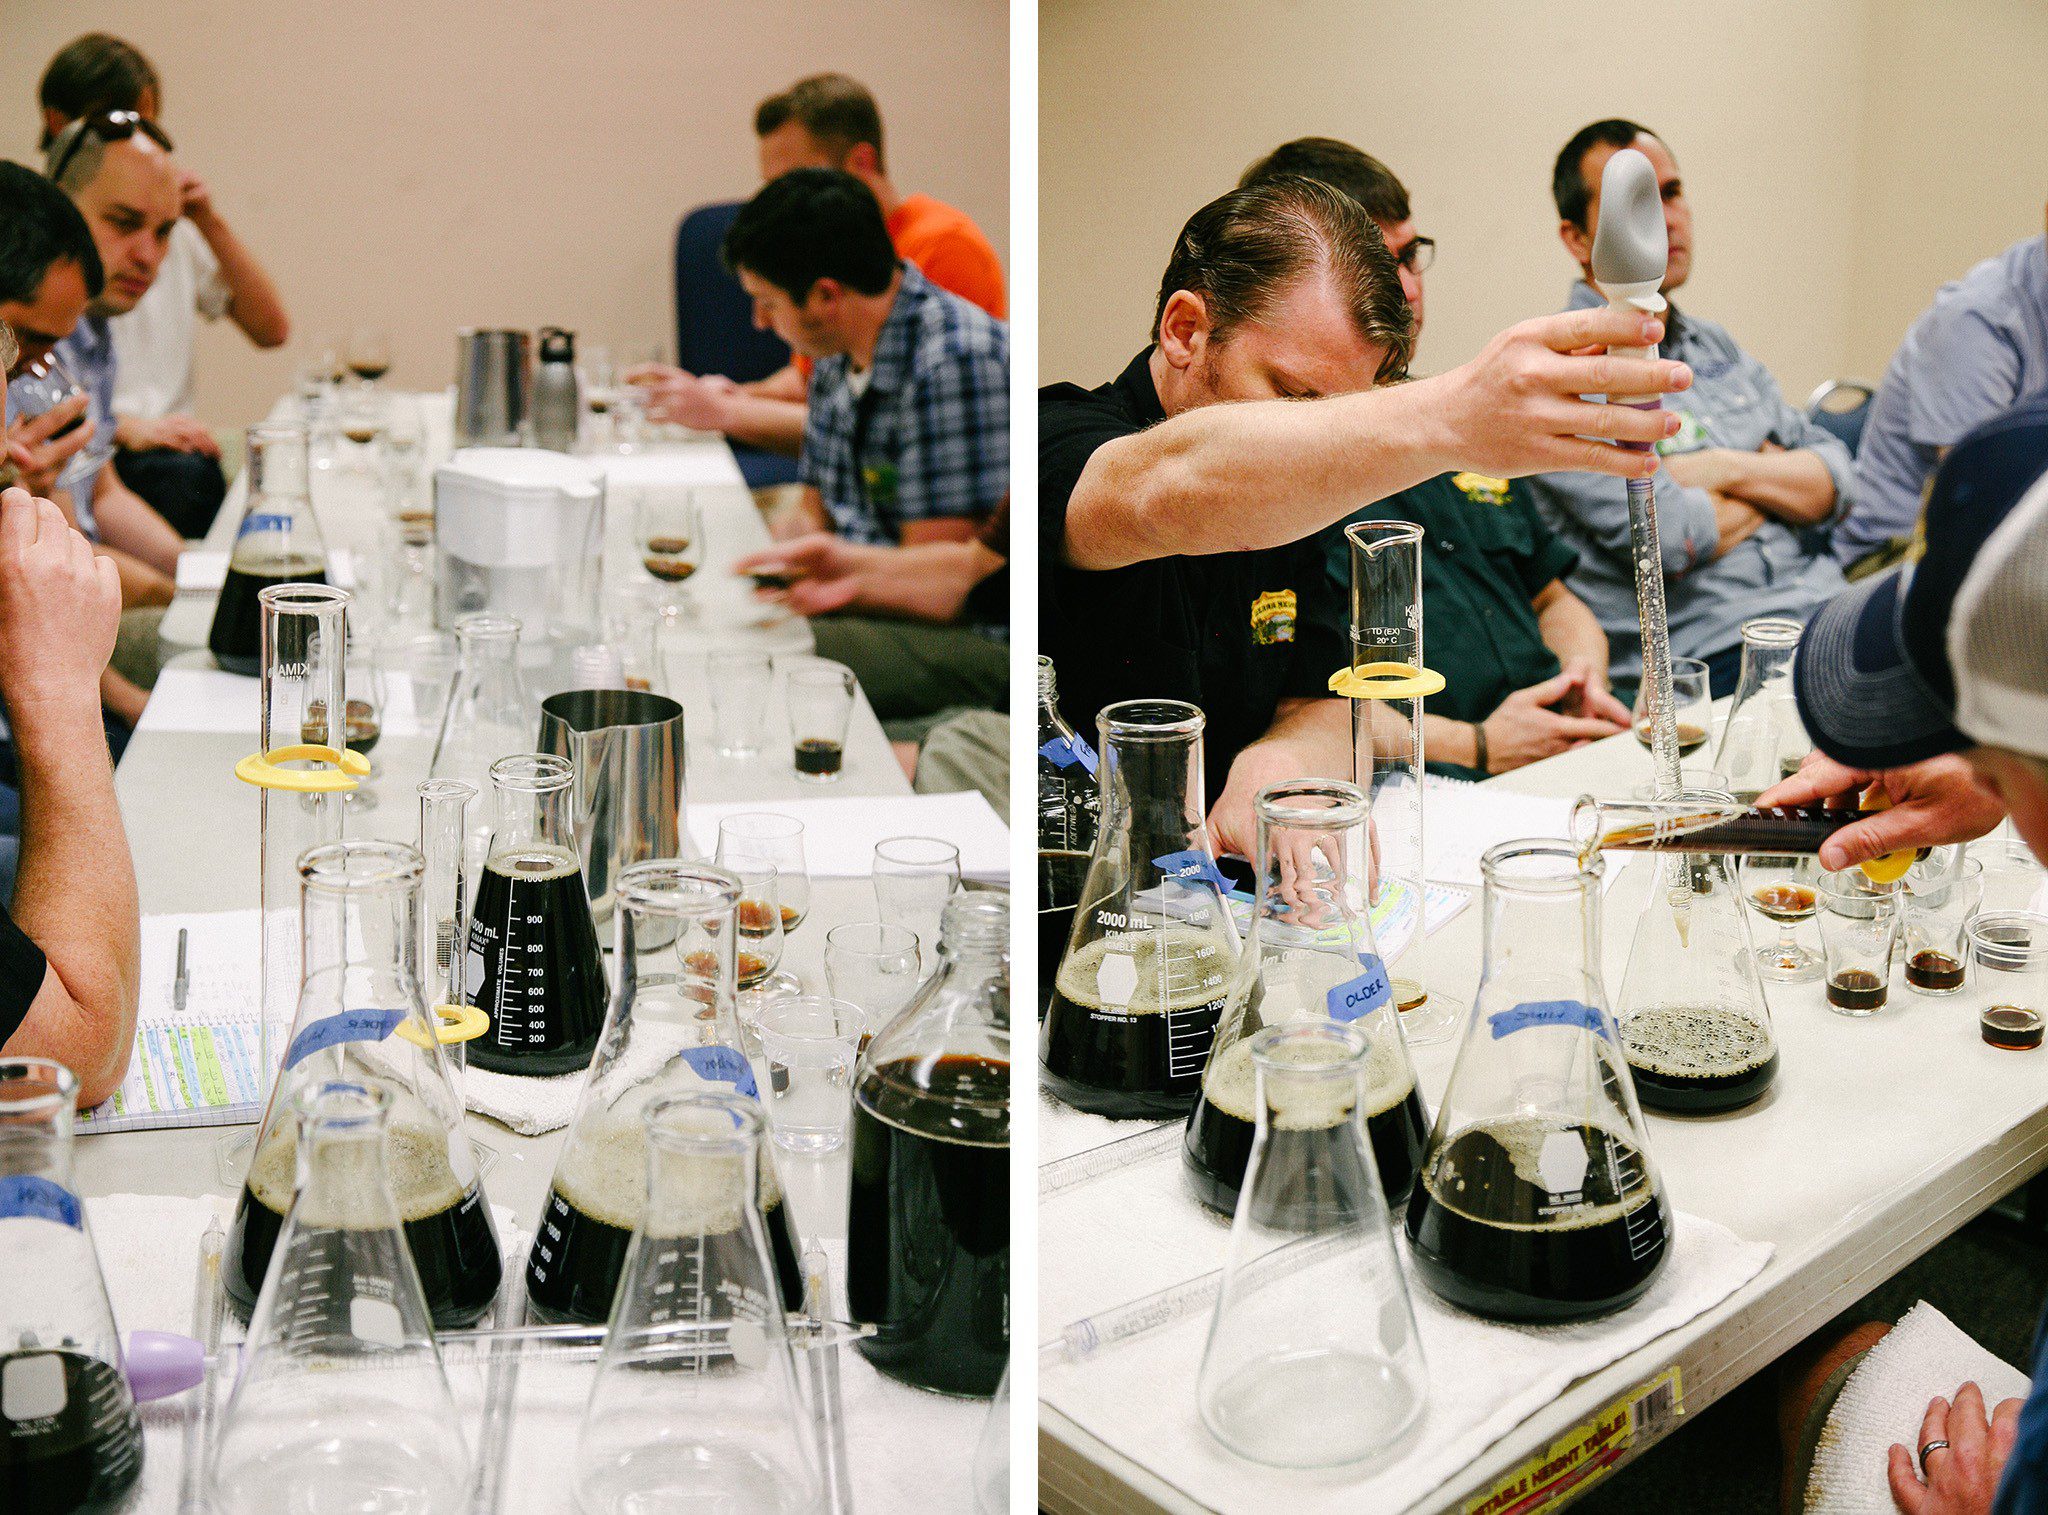 Brewers around a table blending beer using droppers and beakers